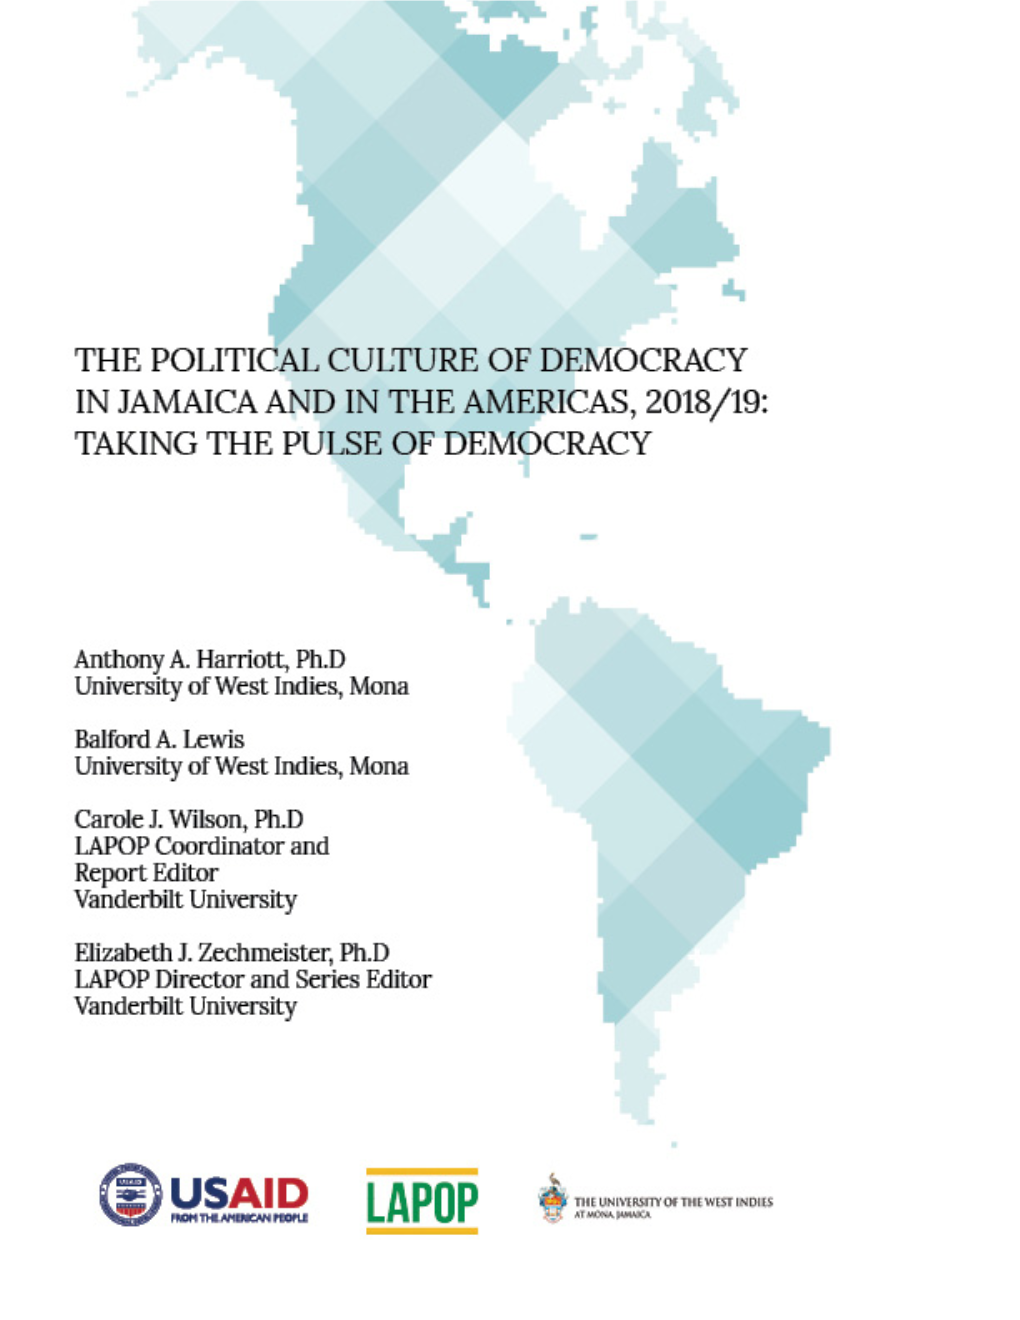 The Political Culture of Democracy in Jamaica and in the Americas, 2018/19: Taking the Pulse of Democracy